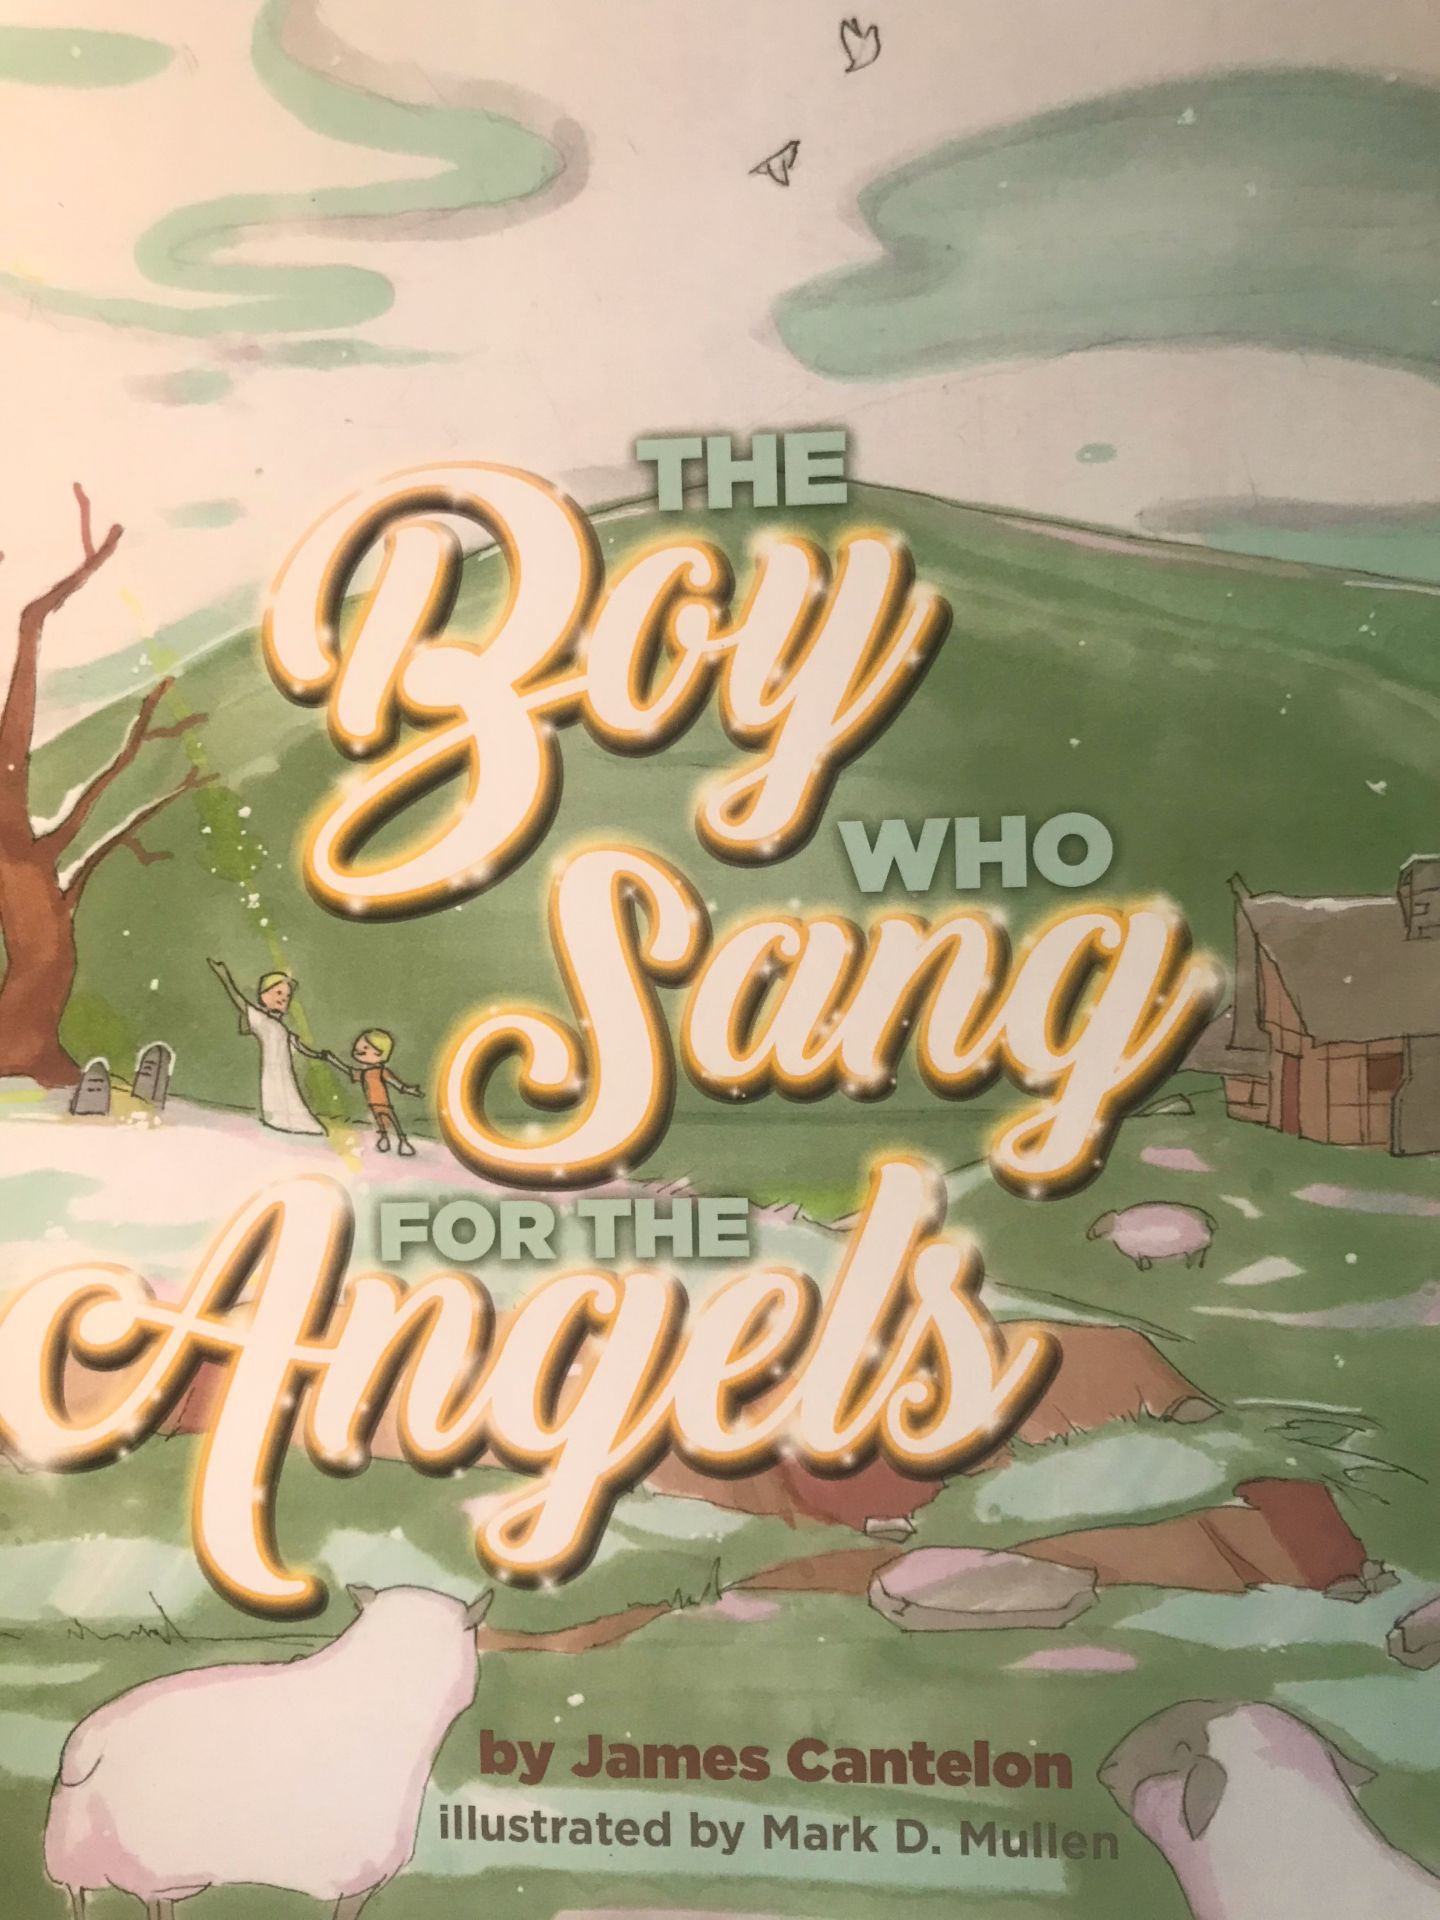 The Boy Who Sang for the Angels